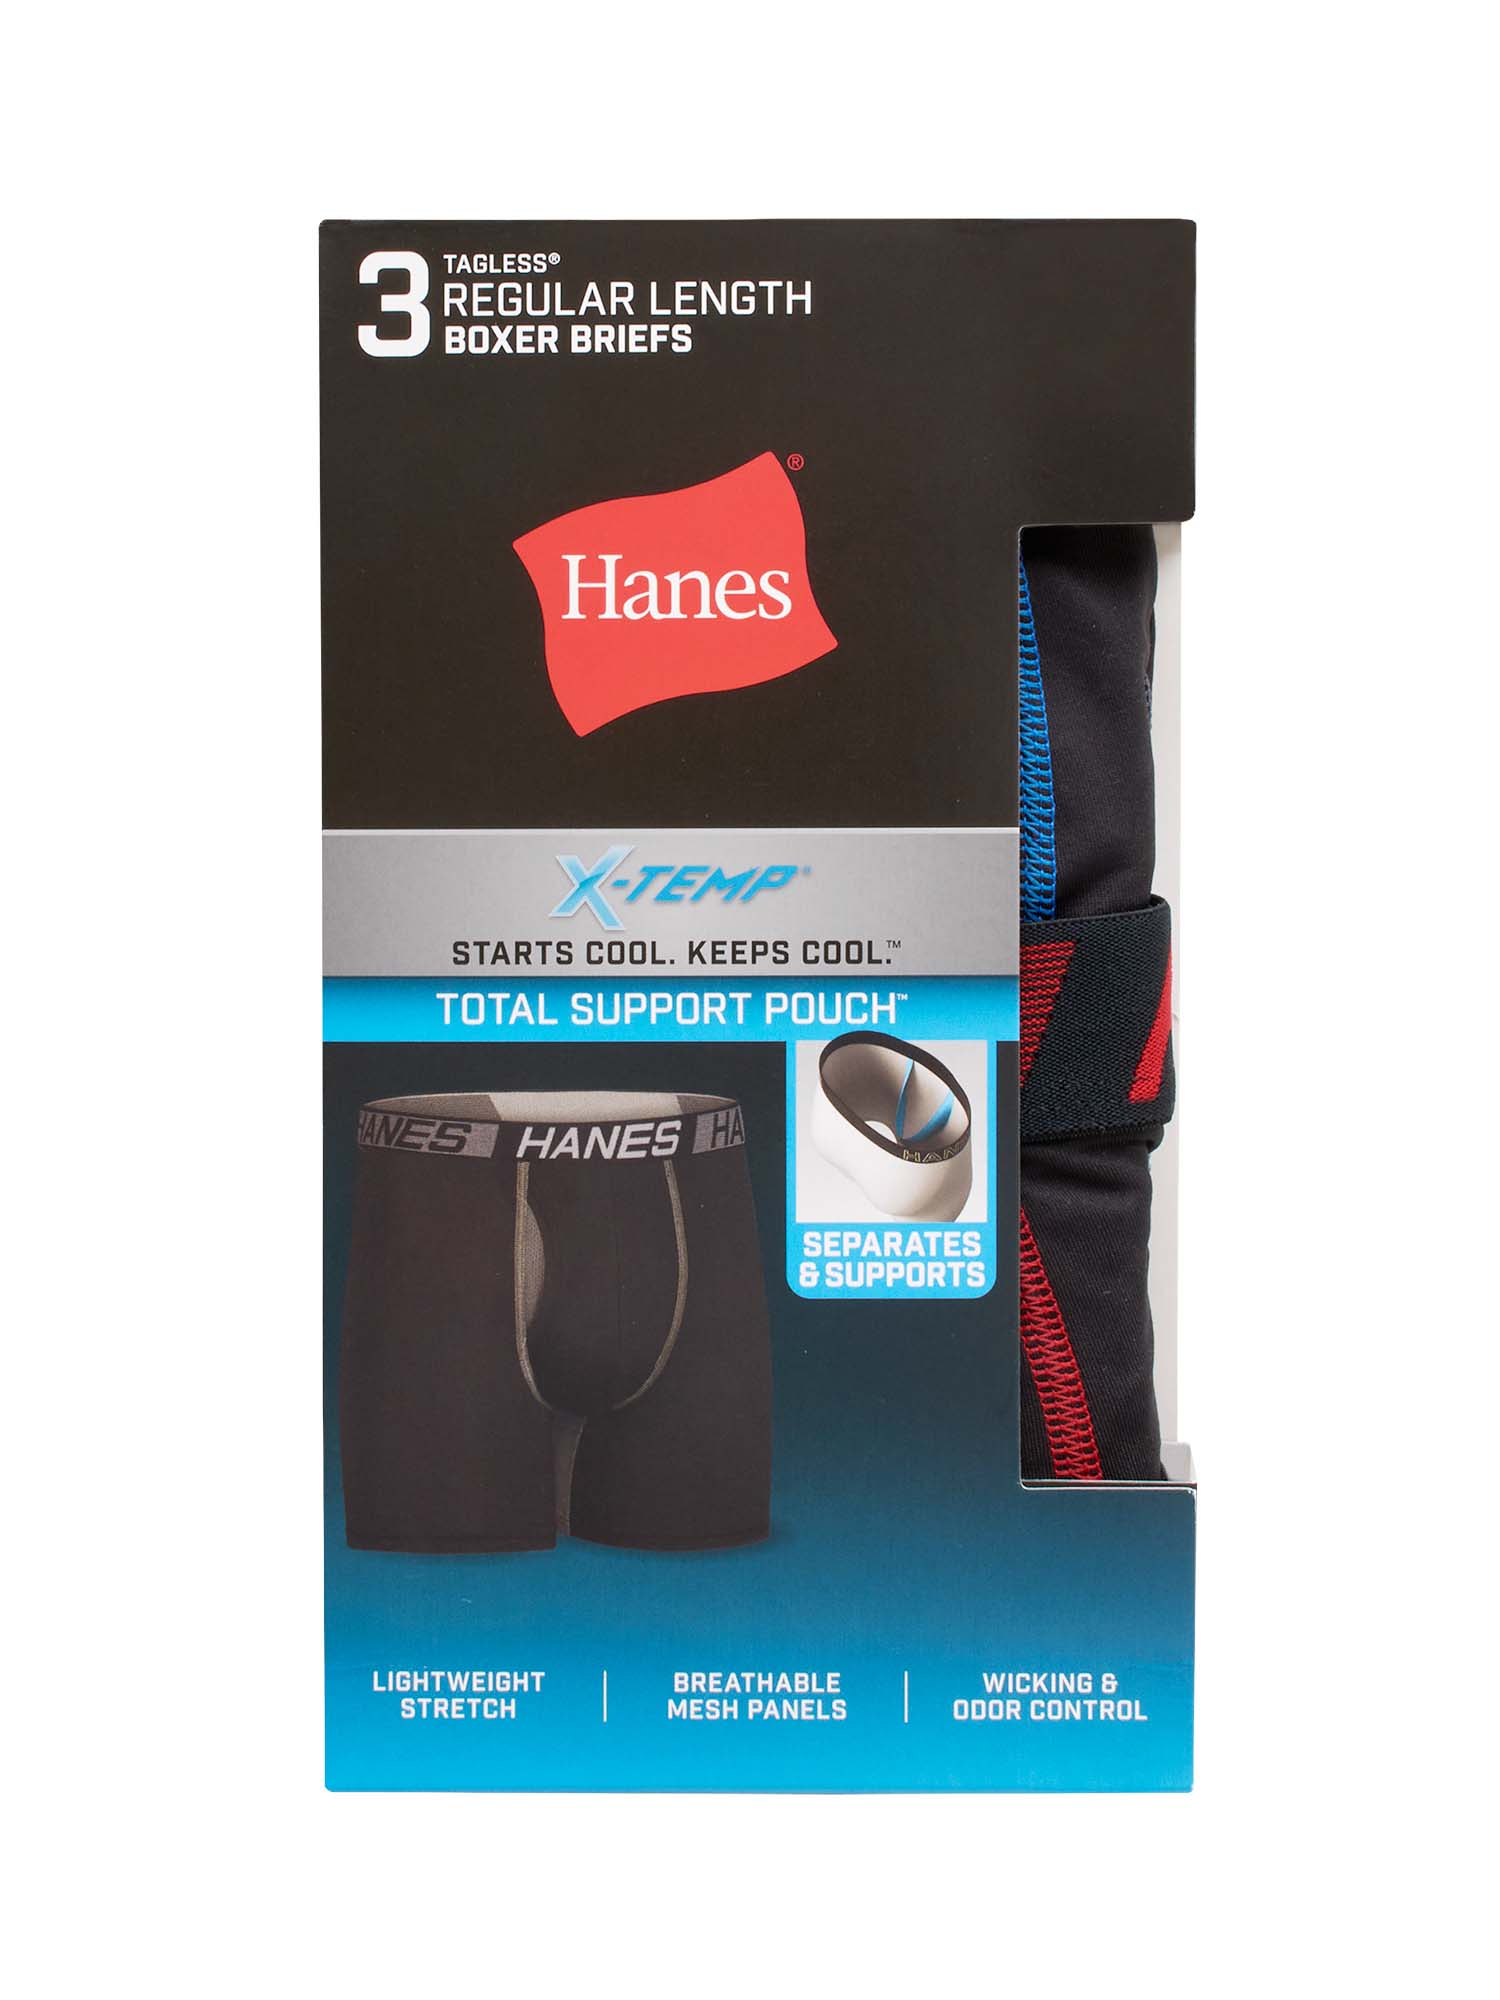 Hanes X-Temp Total Support Pouch Men's Boxer Briefs, Anti-Chafing Underwear, 3-Pack - image 3 of 10